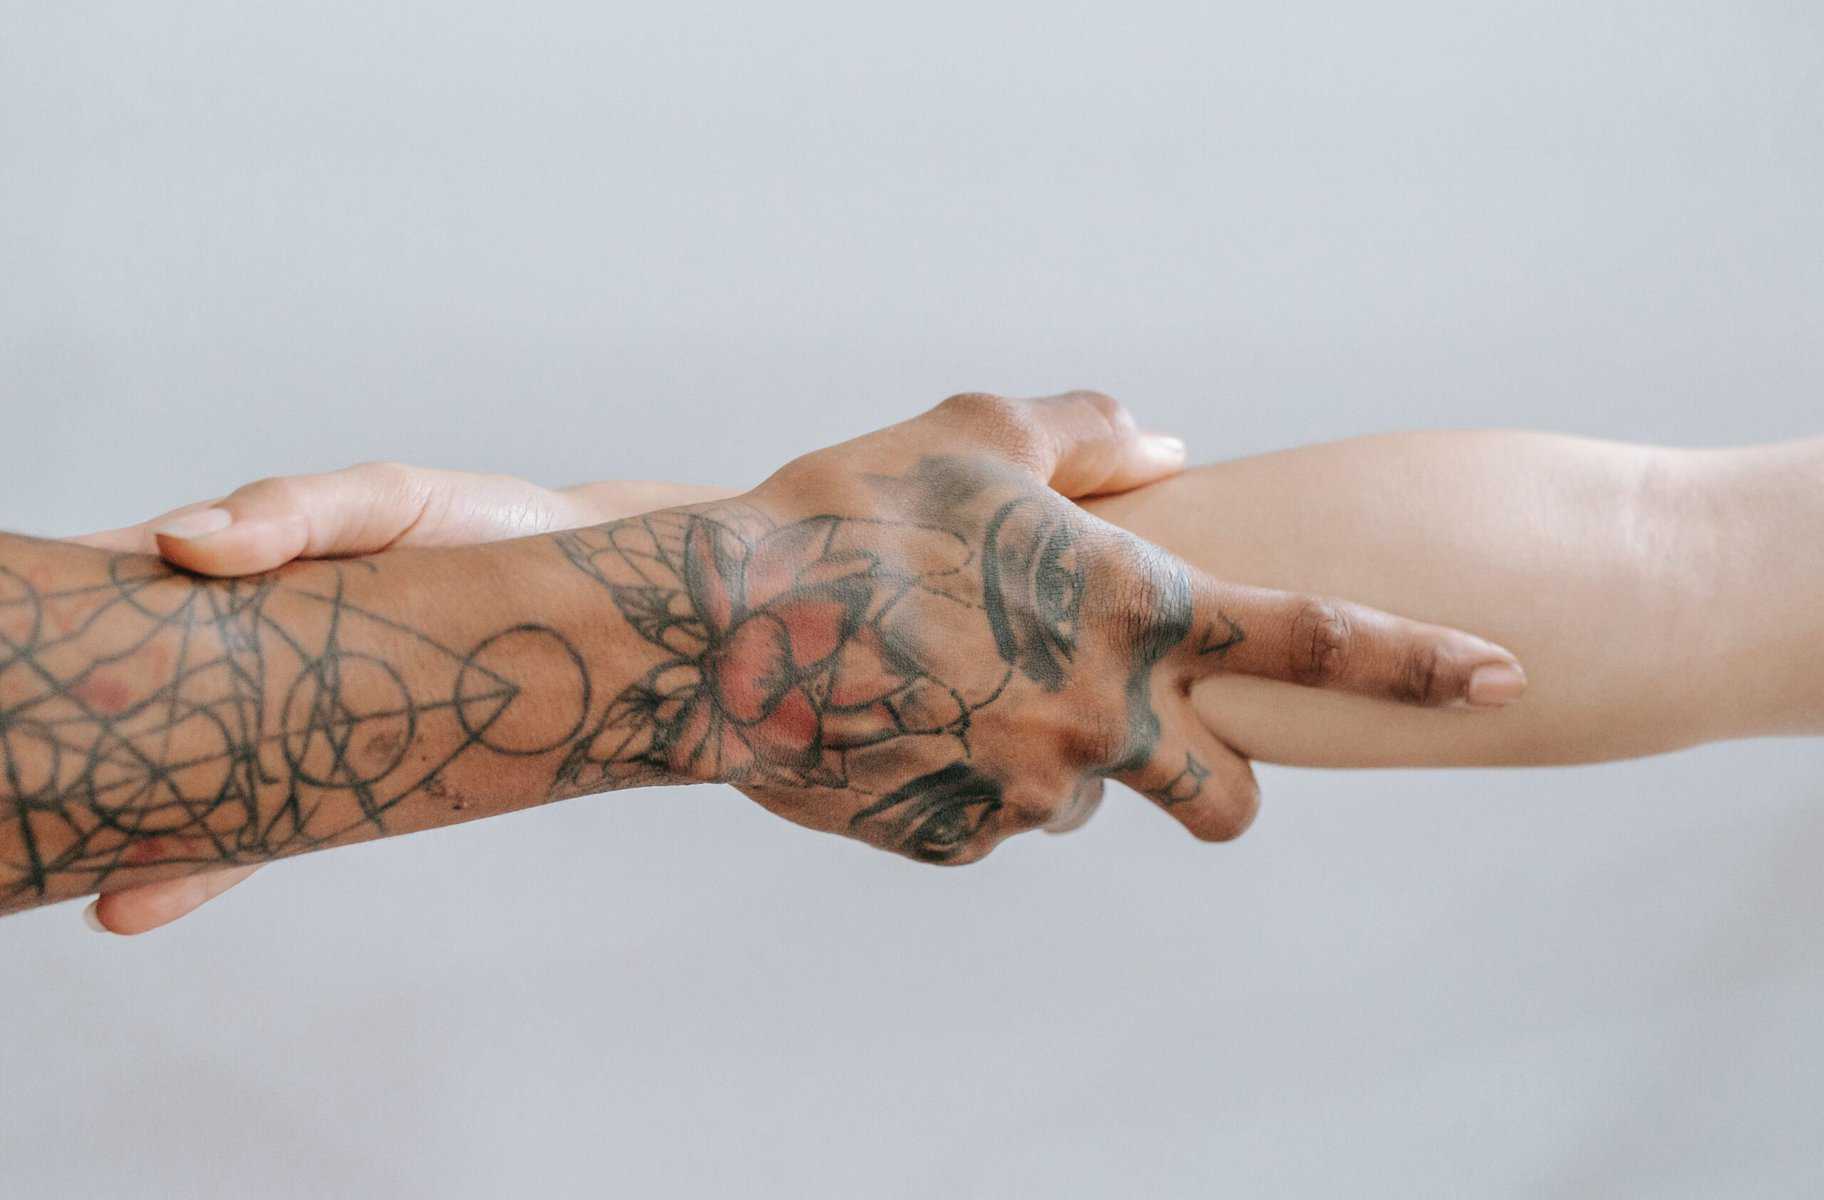 A tattooed hand and forearm is shown grabbing the forearm of a non-tattooed arm.